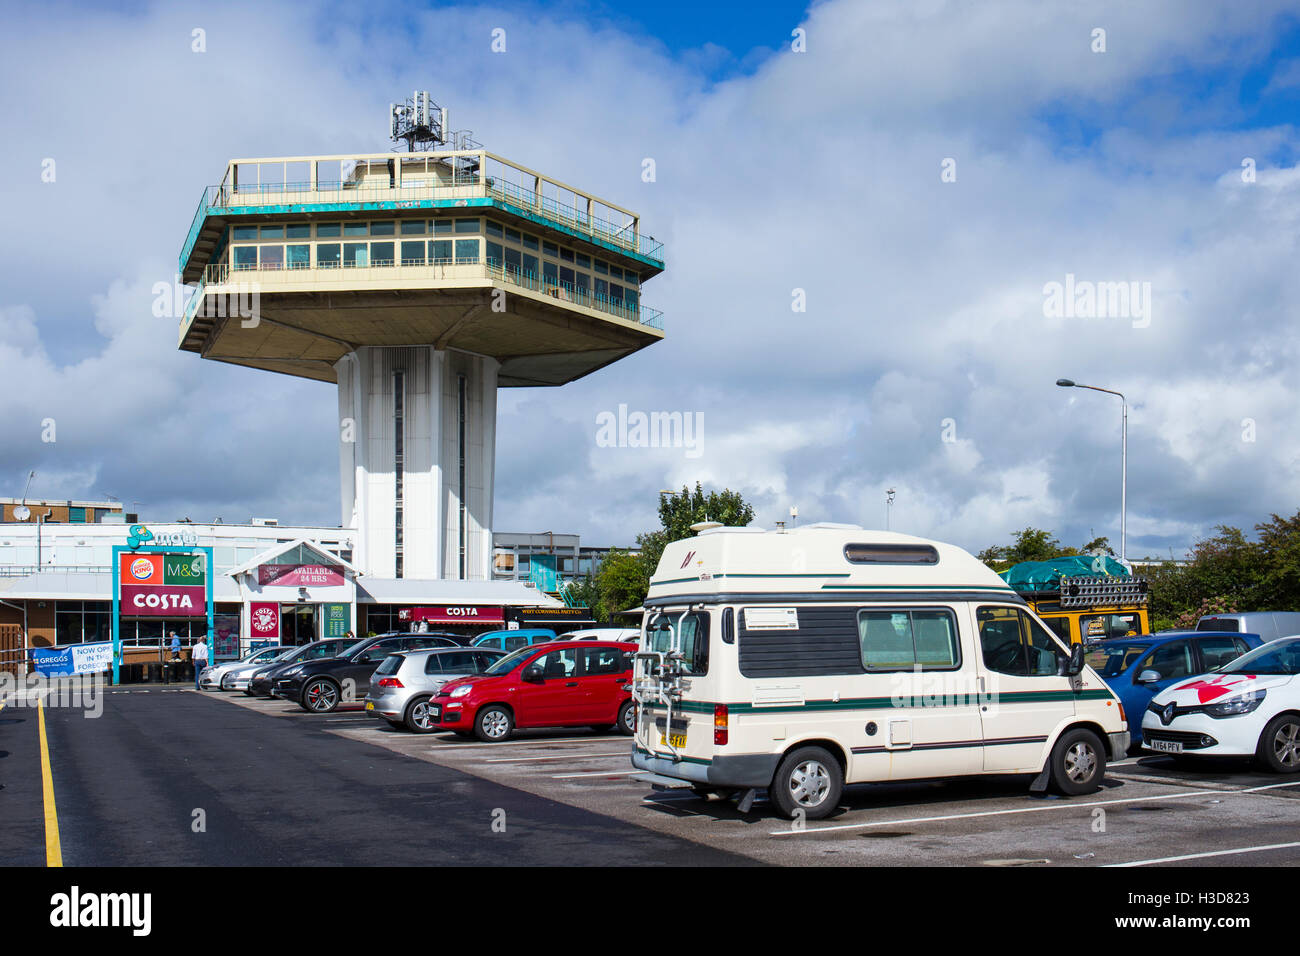 Pennine Tower at Lancaster motorway service on the M6 in Lancashire UK Stock Photo